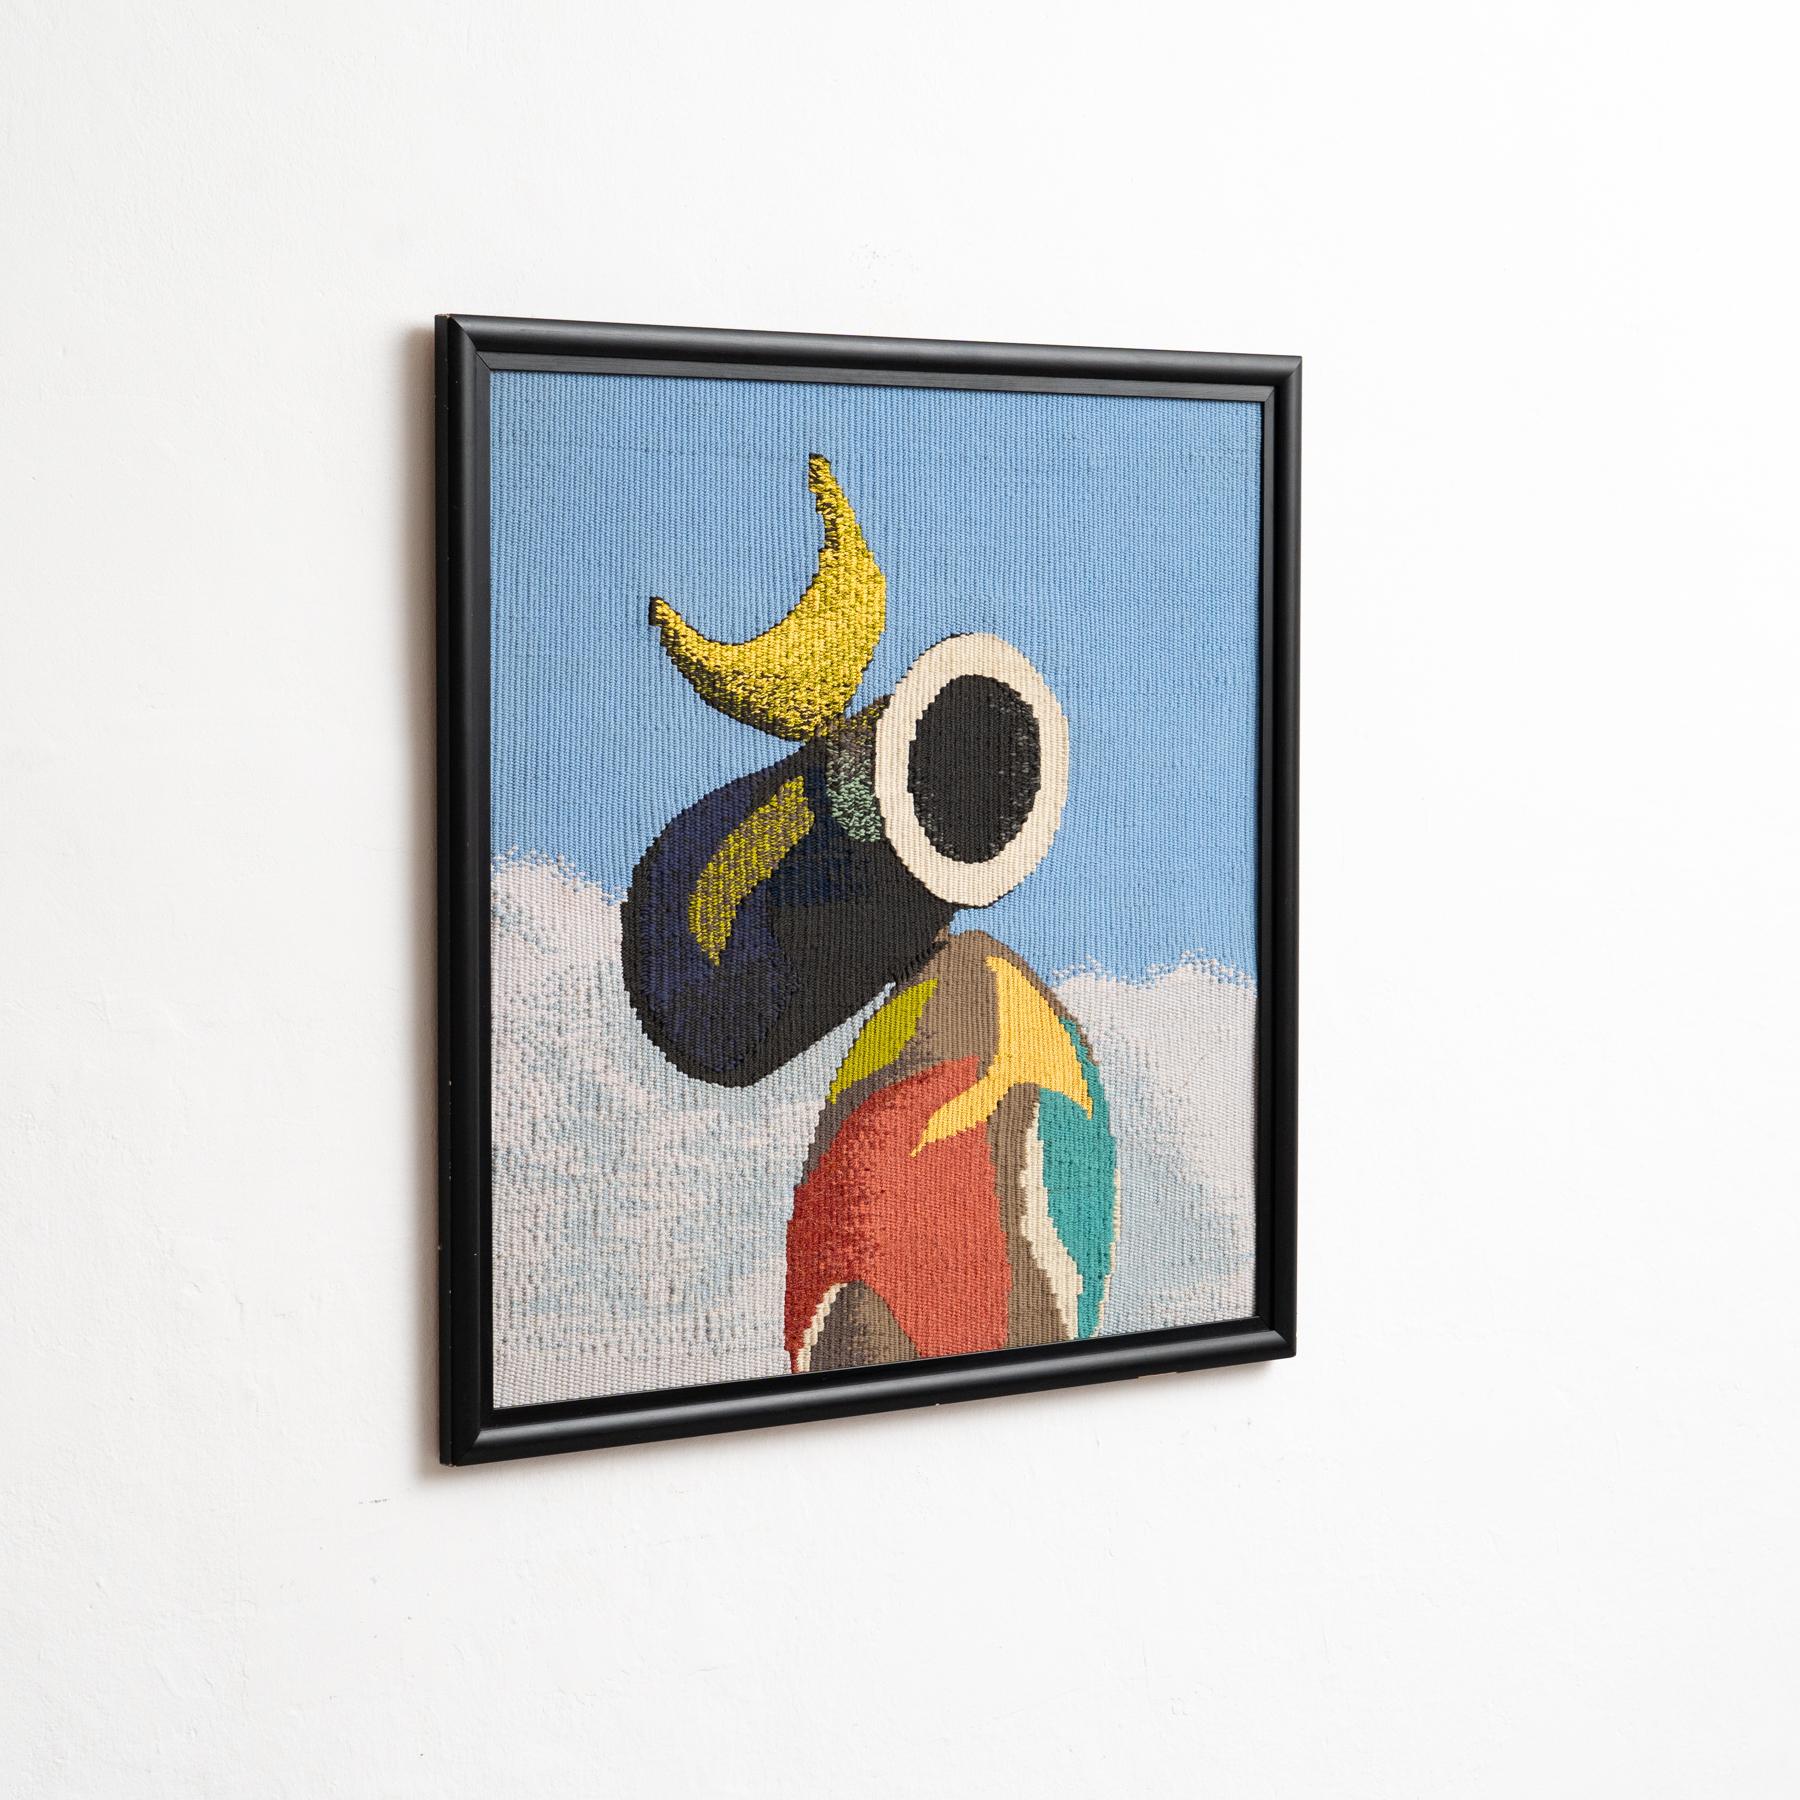 Mid-Century Modern Tapestry Tribute to Joan Miró's 'Woman and Bird', circa 1960 For Sale